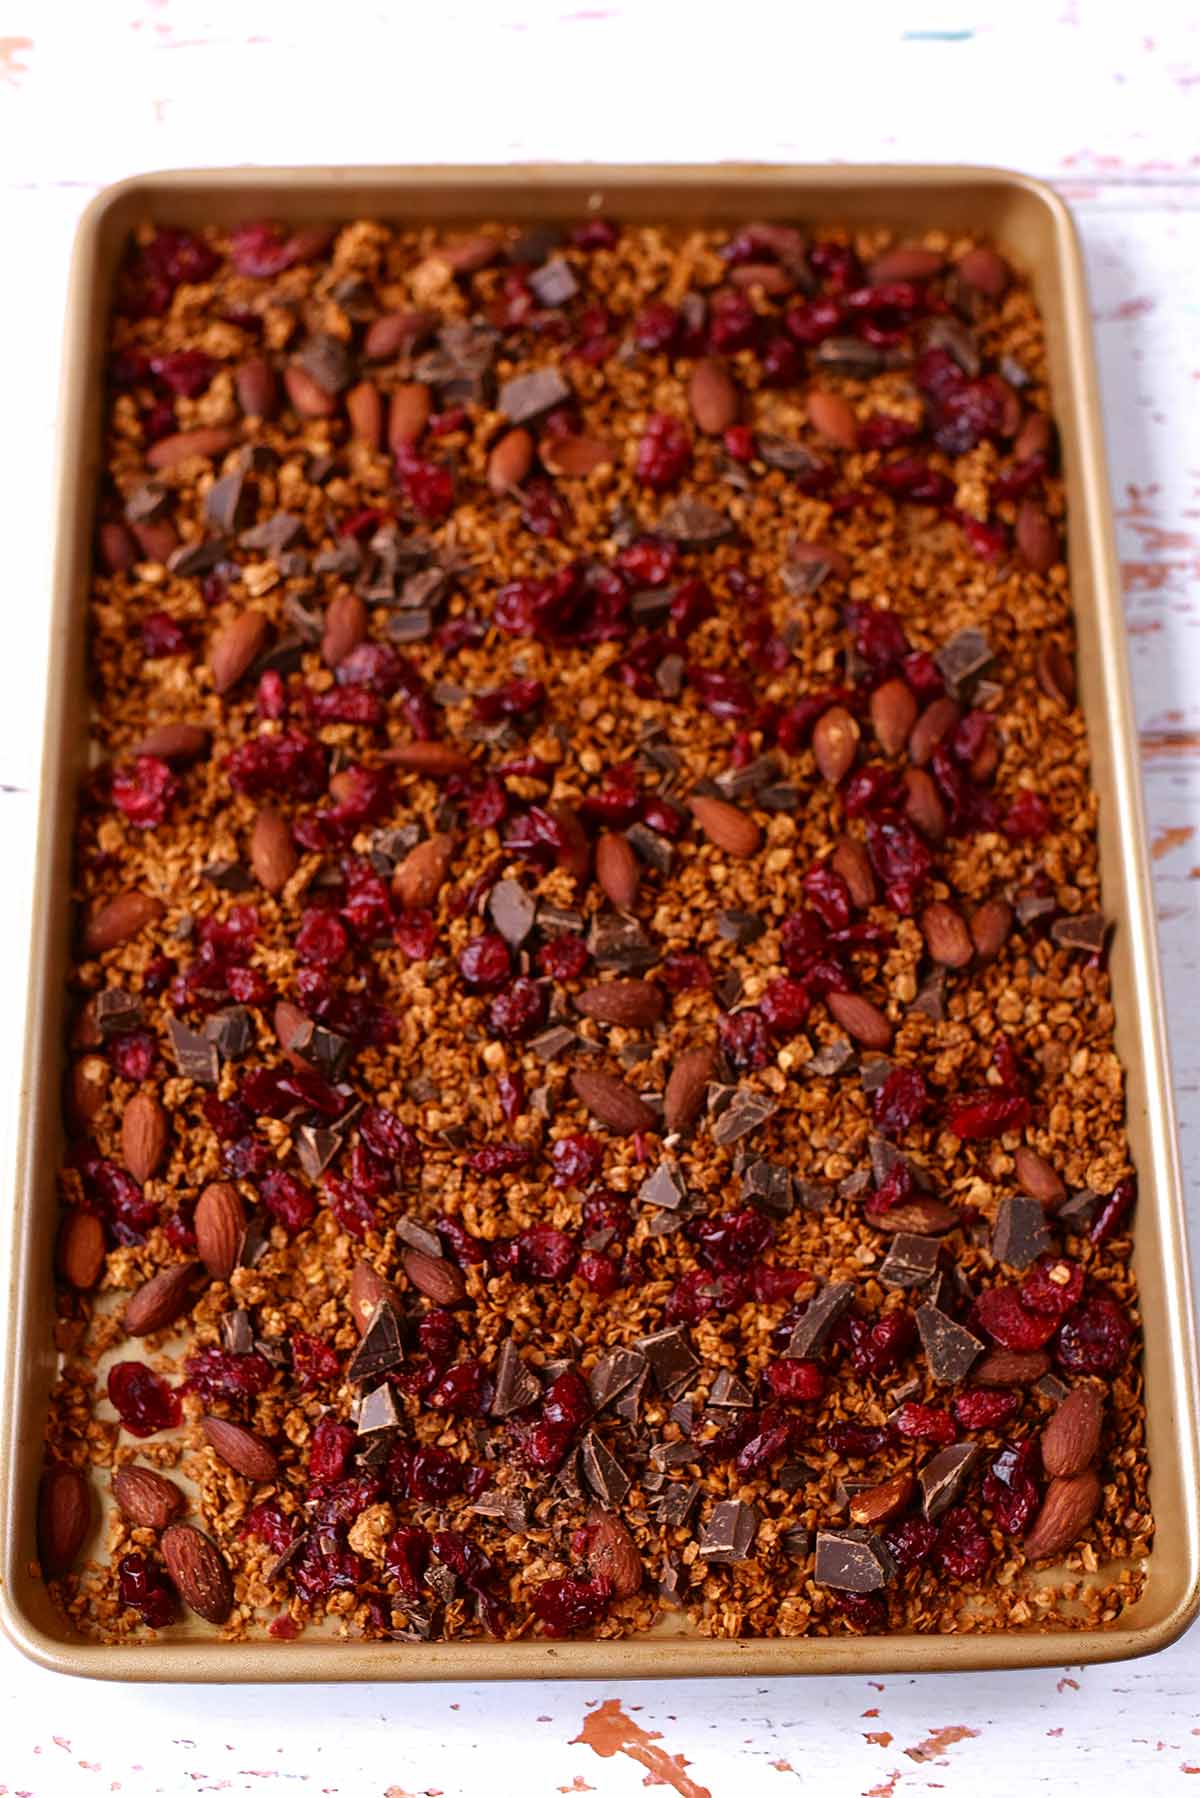 A large baking tray full of cooked granola.